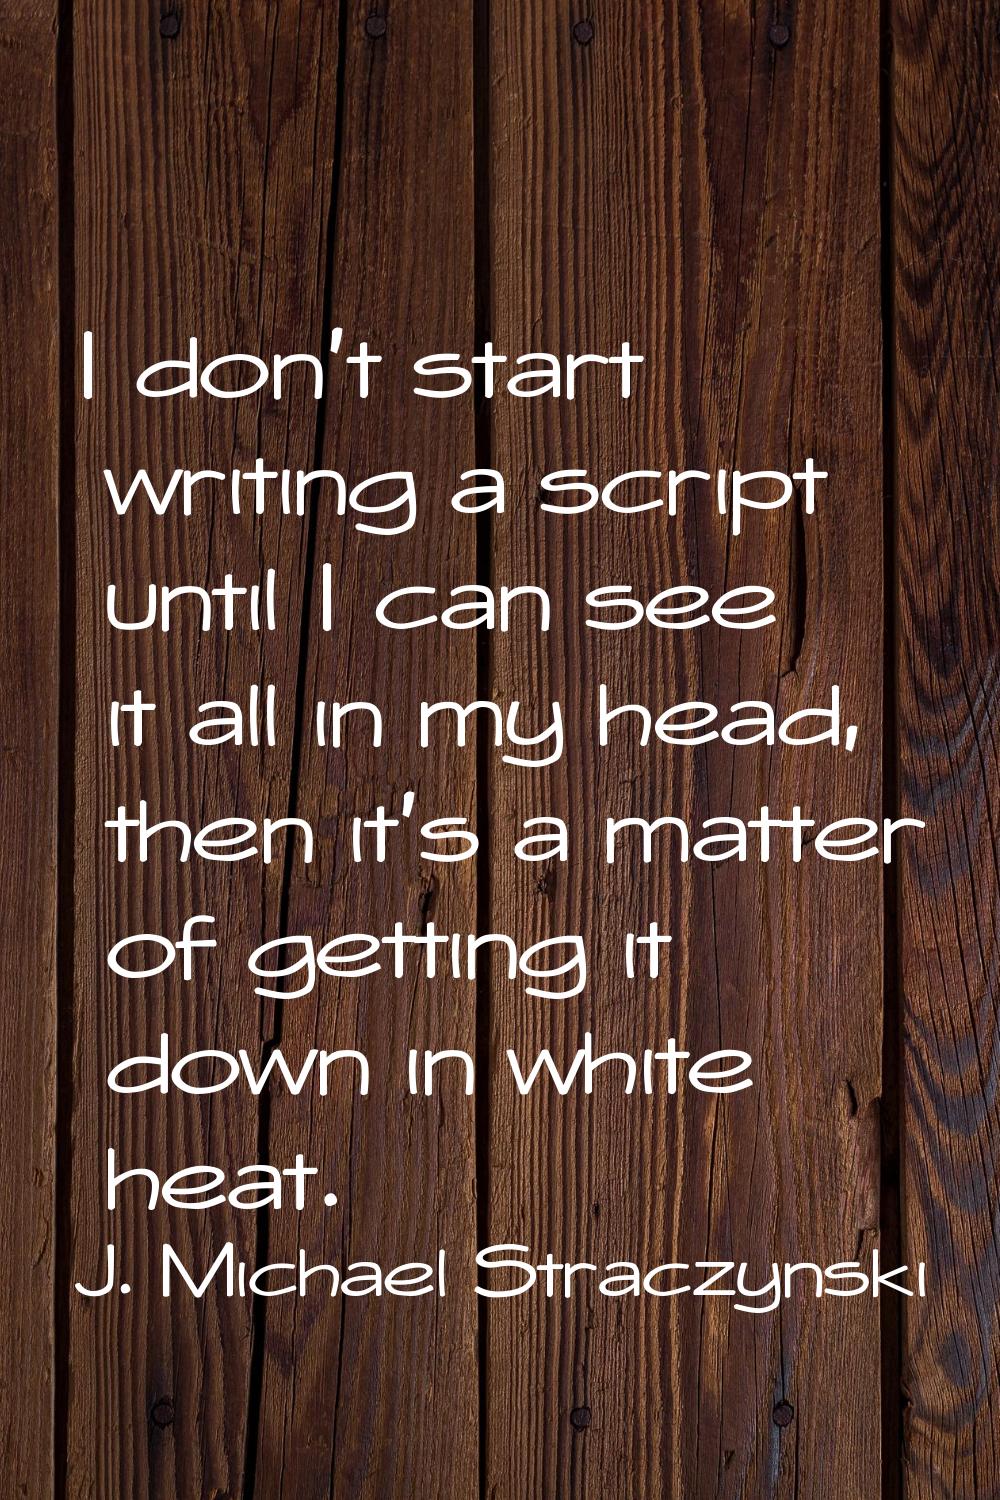 I don't start writing a script until I can see it all in my head, then it's a matter of getting it 